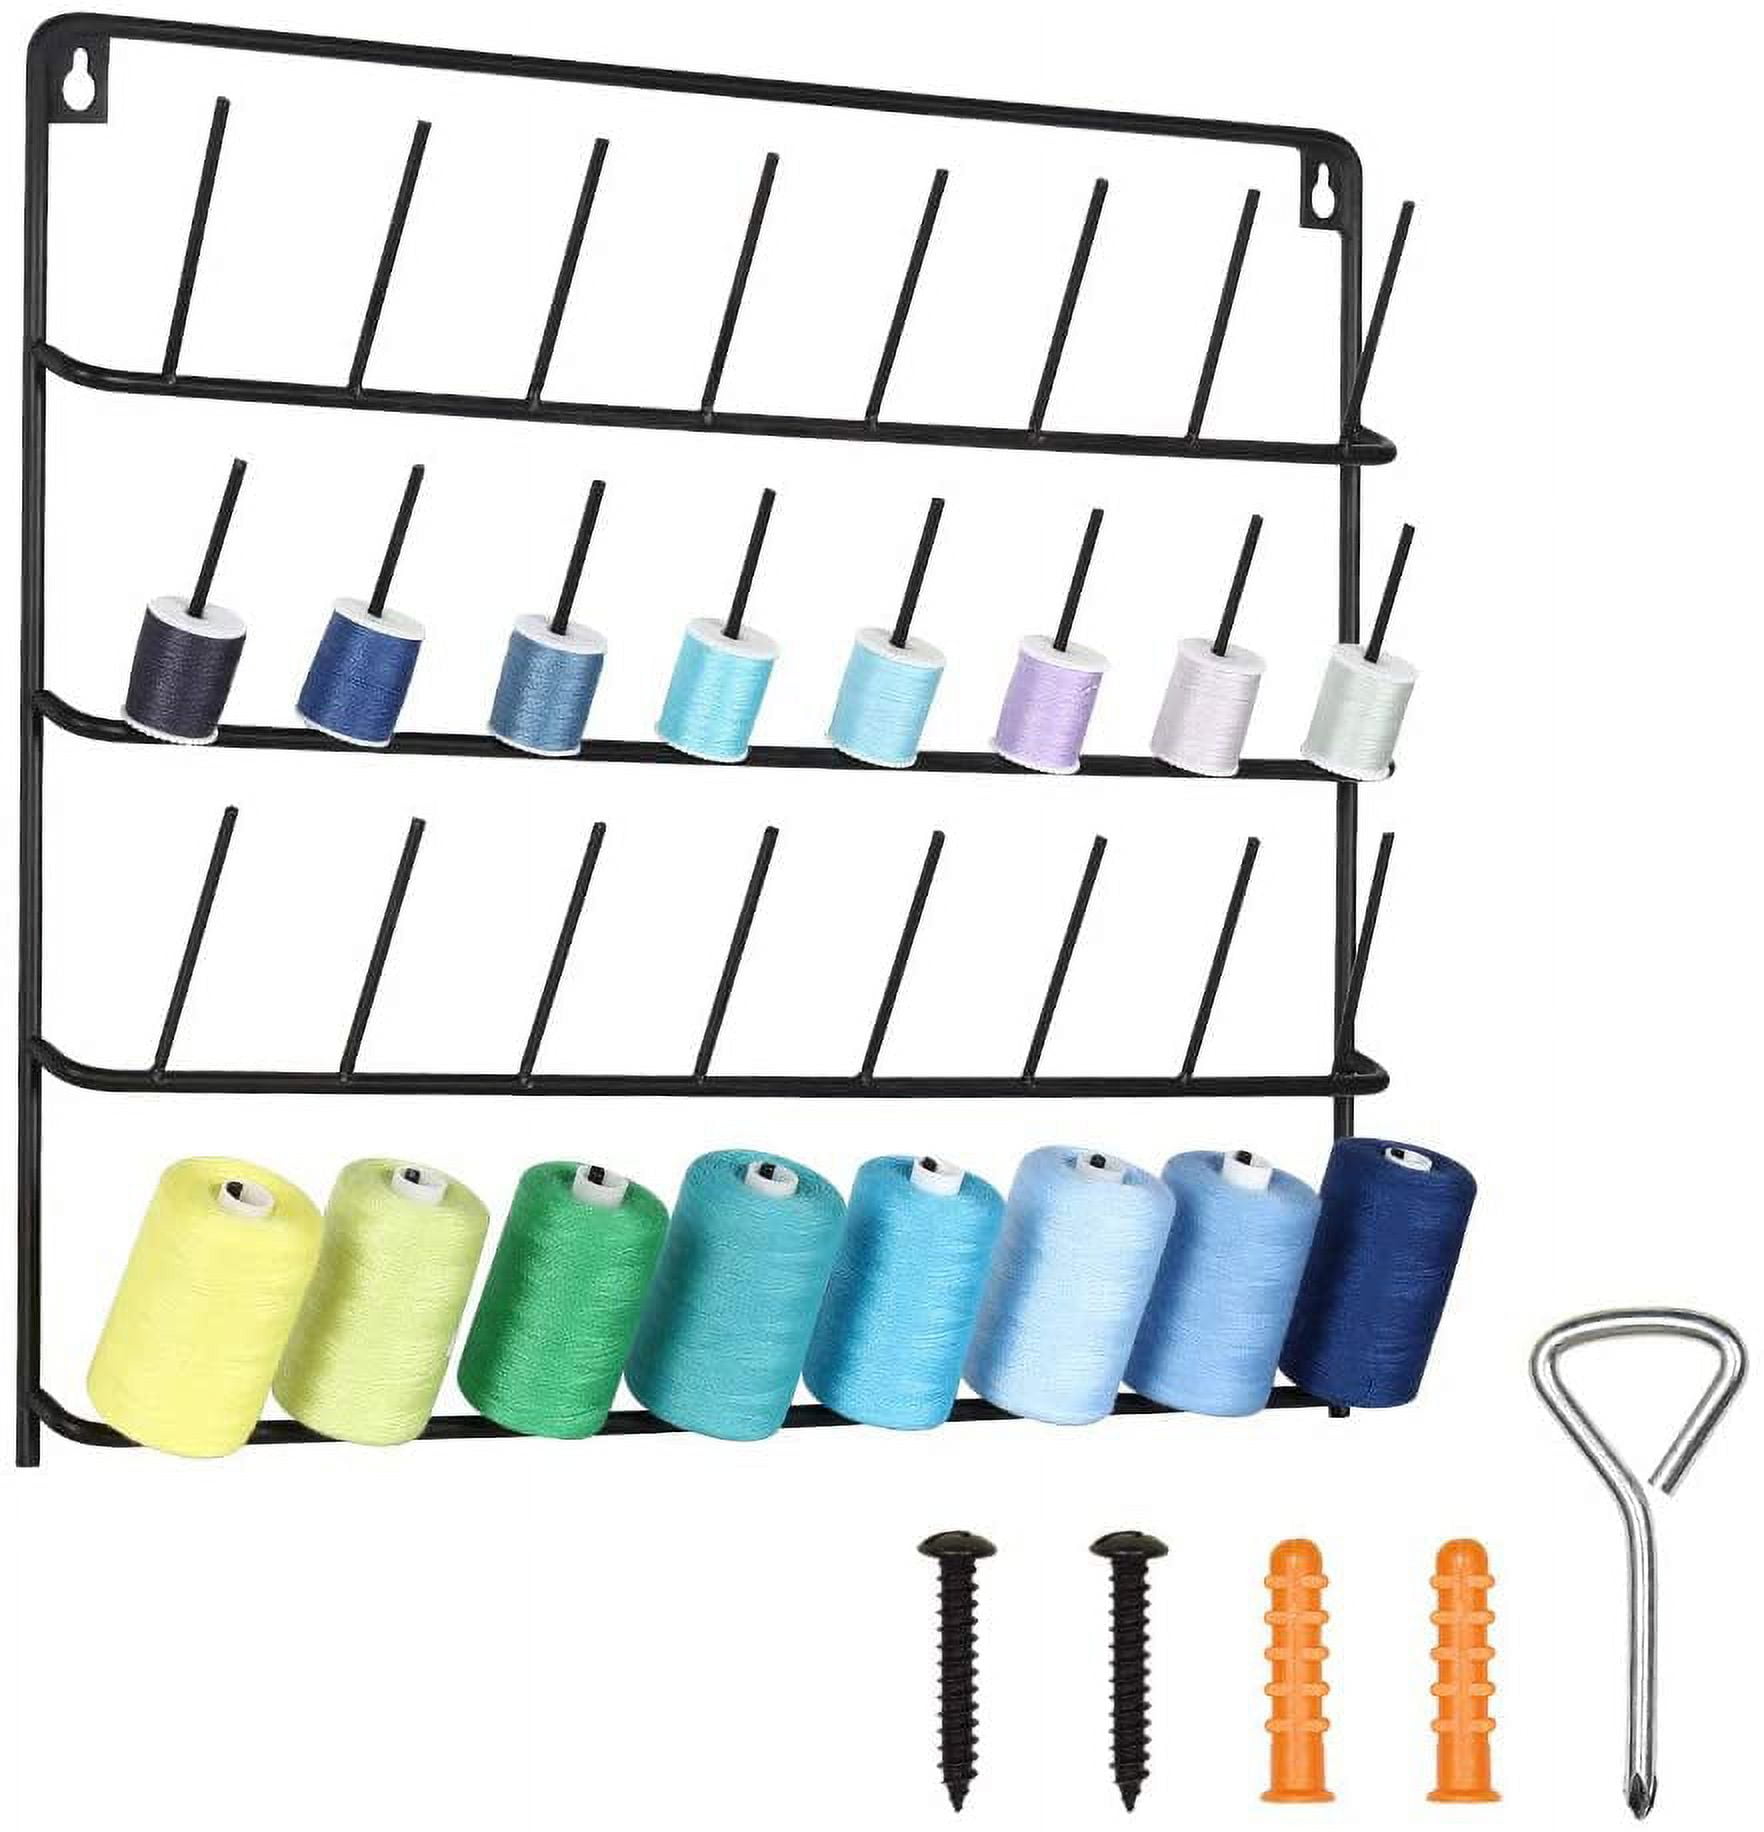 48 Spool Sewing Thread Rack Holder, Wall Mounted Hanging Thread Holder Organizer for Sewing, Embroidery, Quilting, Hair Braiding, Size: 43x30.5x2cm